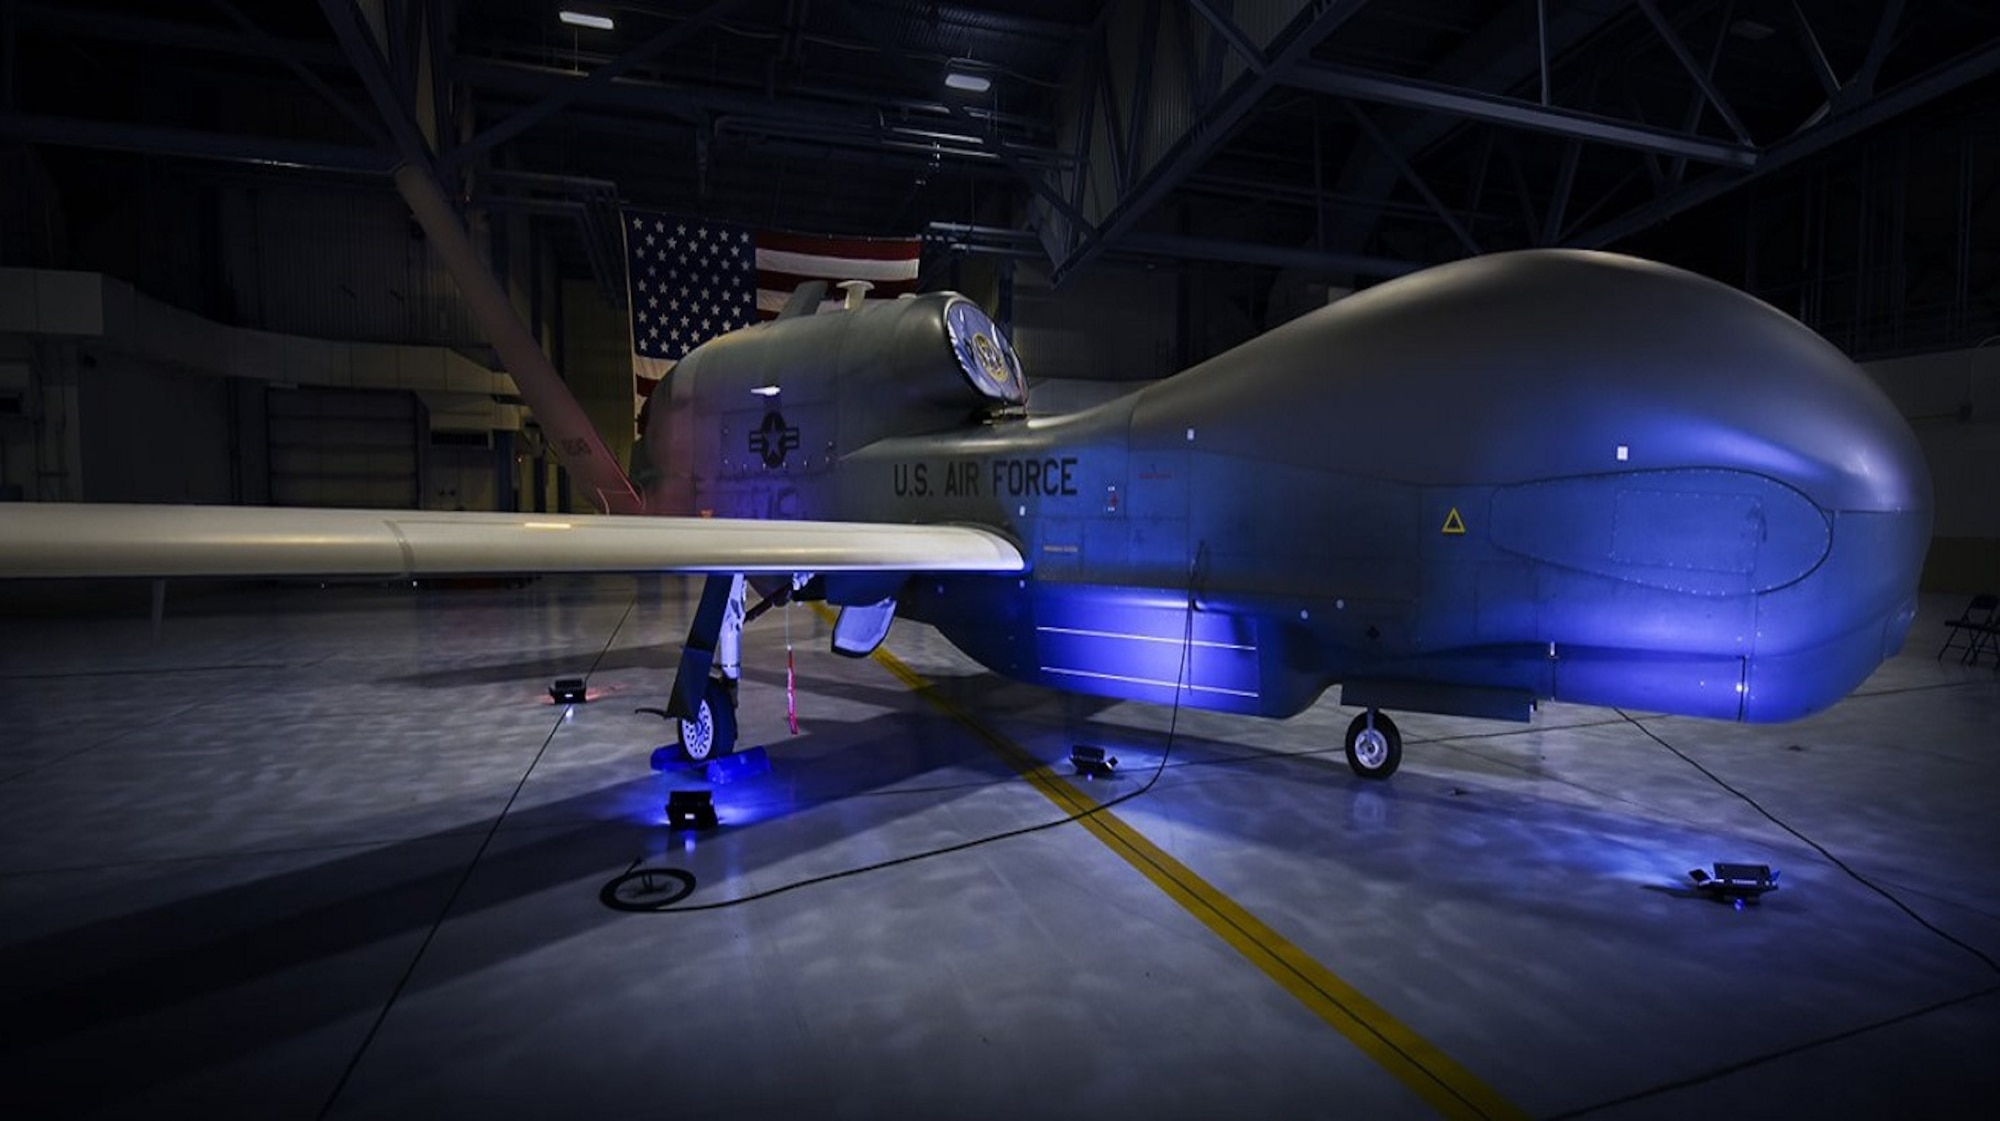 Headquartered at Grand Forks Air Force Base, North Dakota, the wing delivers air, space, and cyberspace capabilities to combatant commands, and provides infrastructure and support to RQ-4 Global Hawk mission.